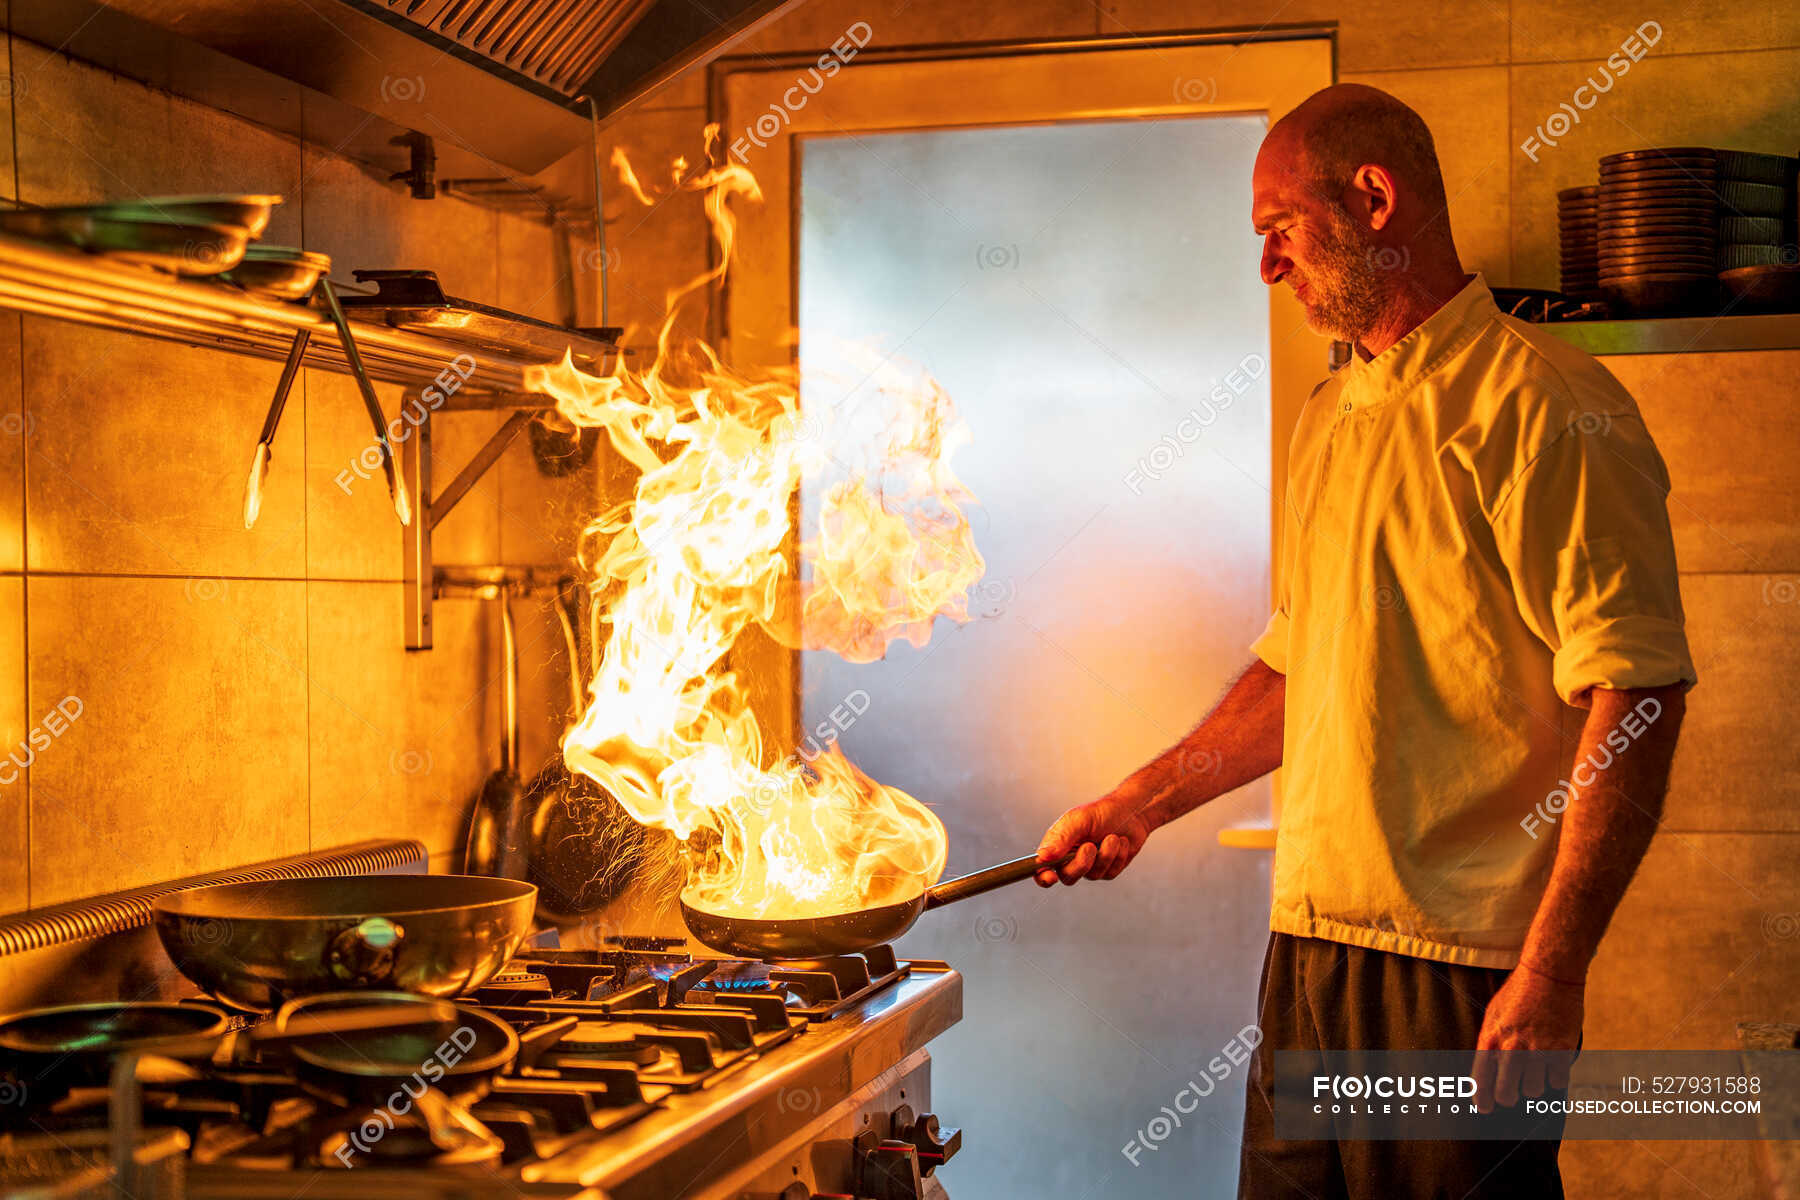 https://st.focusedcollection.com/14026668/i/1800/focused_527931588-stock-photo-male-chef-flaming-pan-cooking.jpg